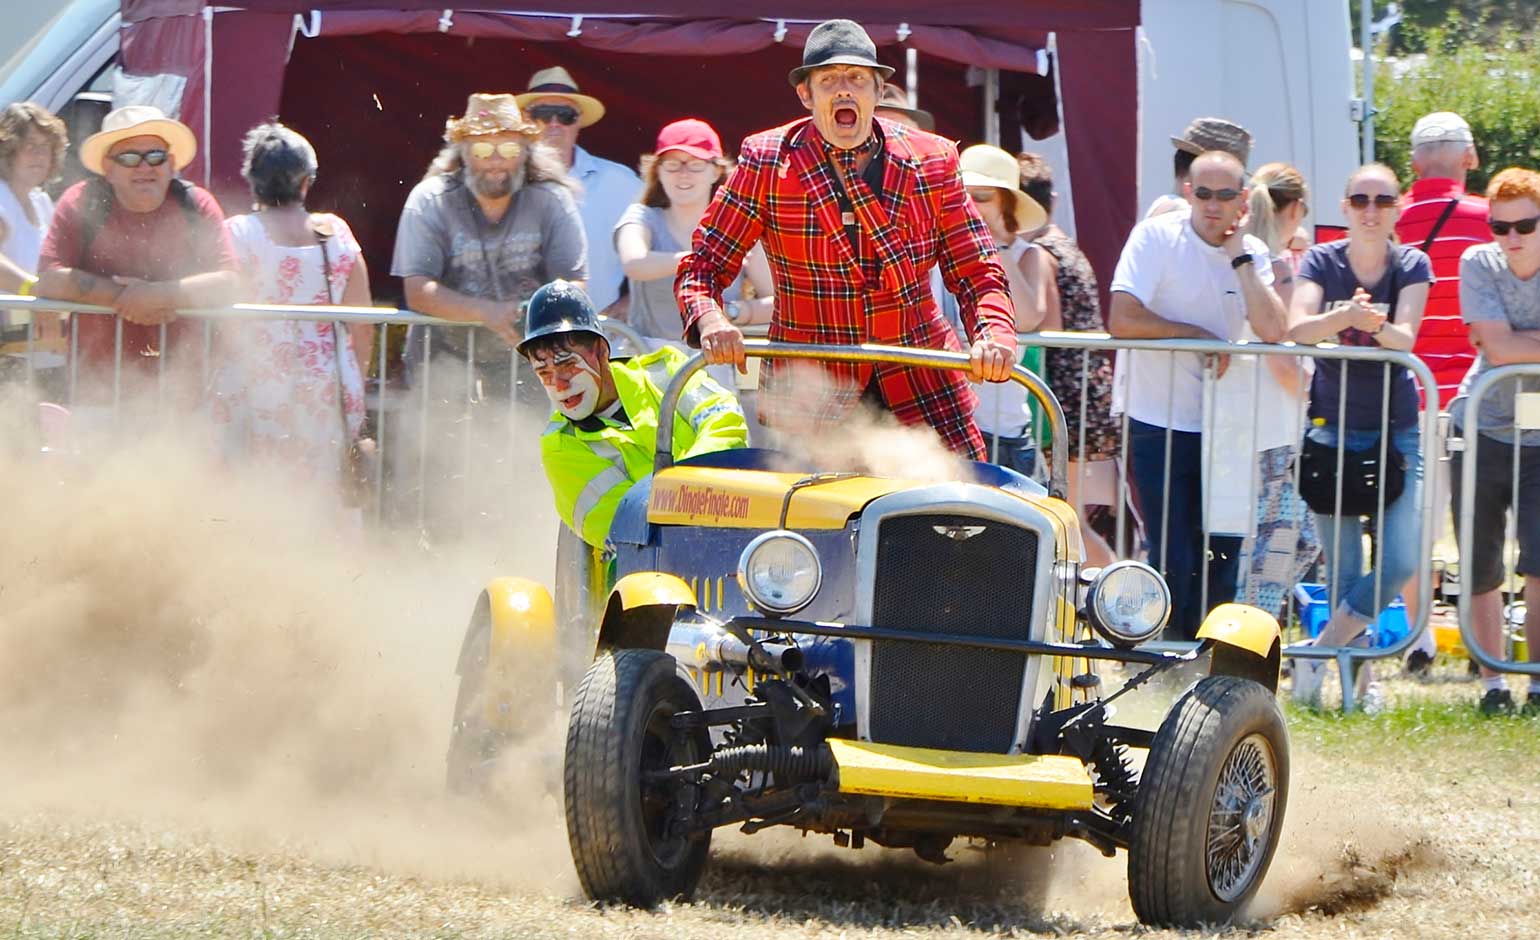 Spring into action with a family day out at Dorset’s first countryside show of the rural calendar